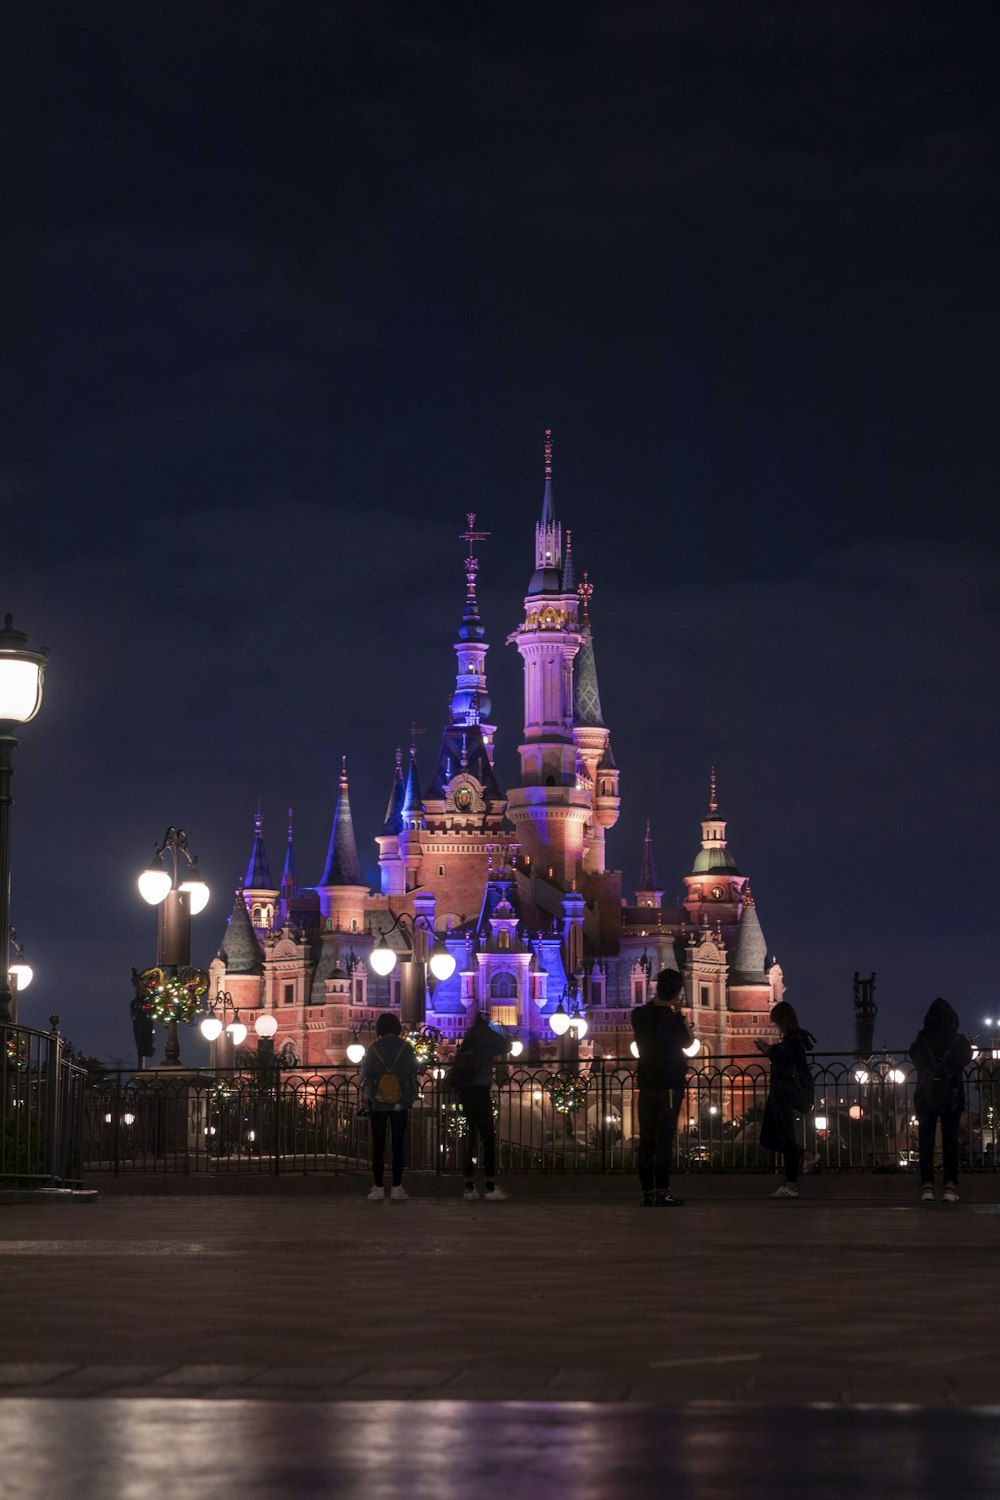 a castle lit up at night with people standing in front of it